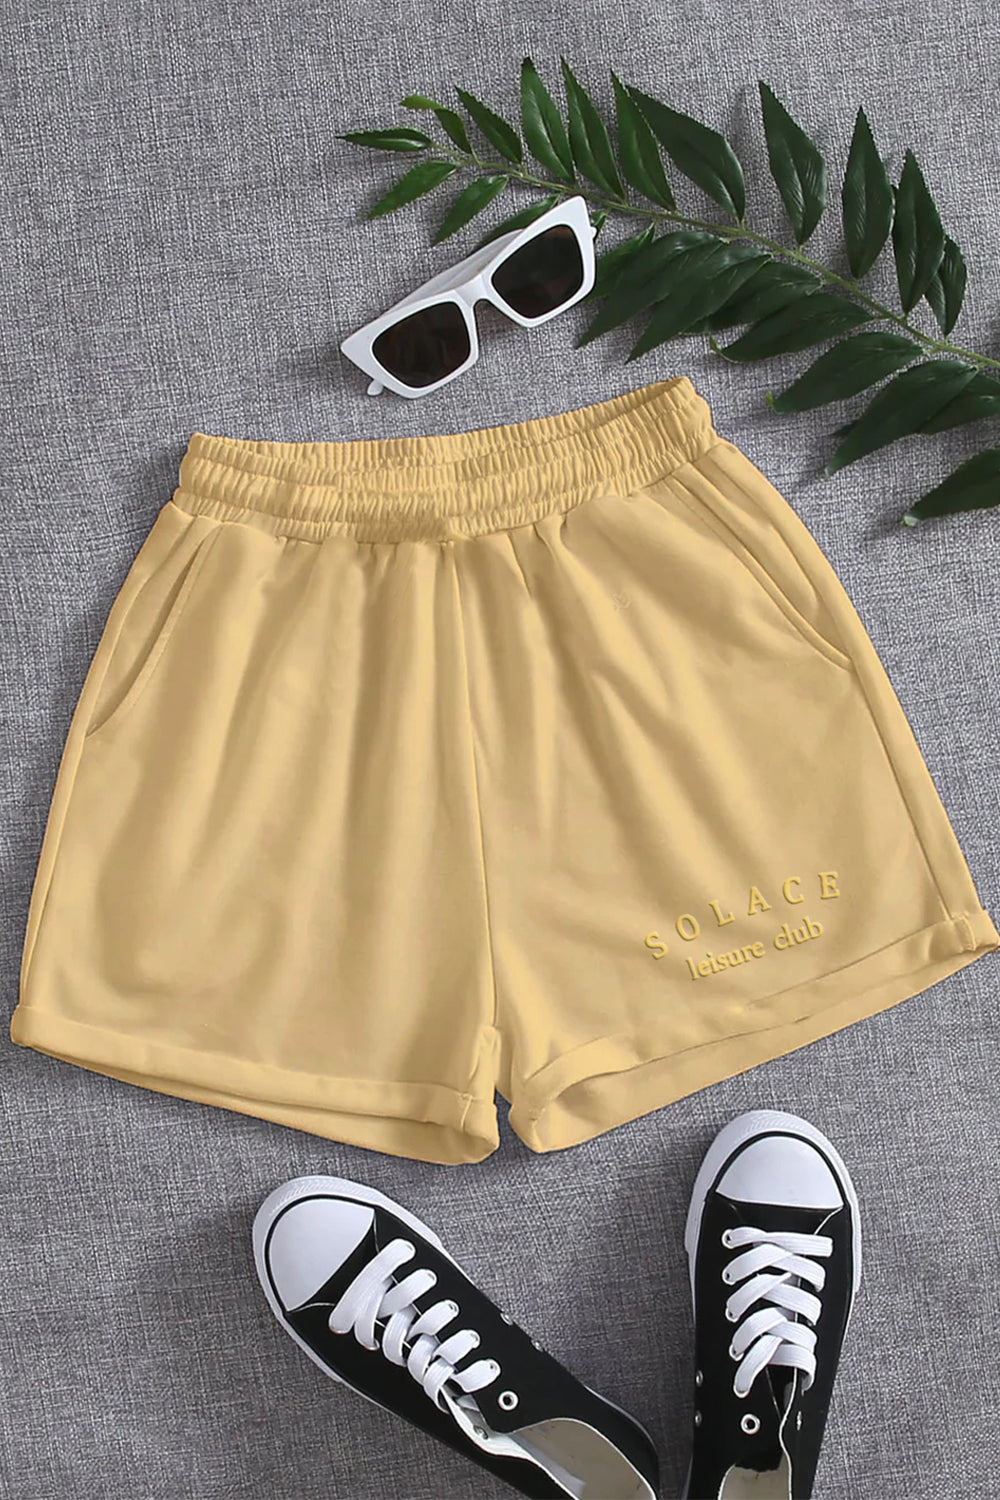 Solace Typography Women Shorts